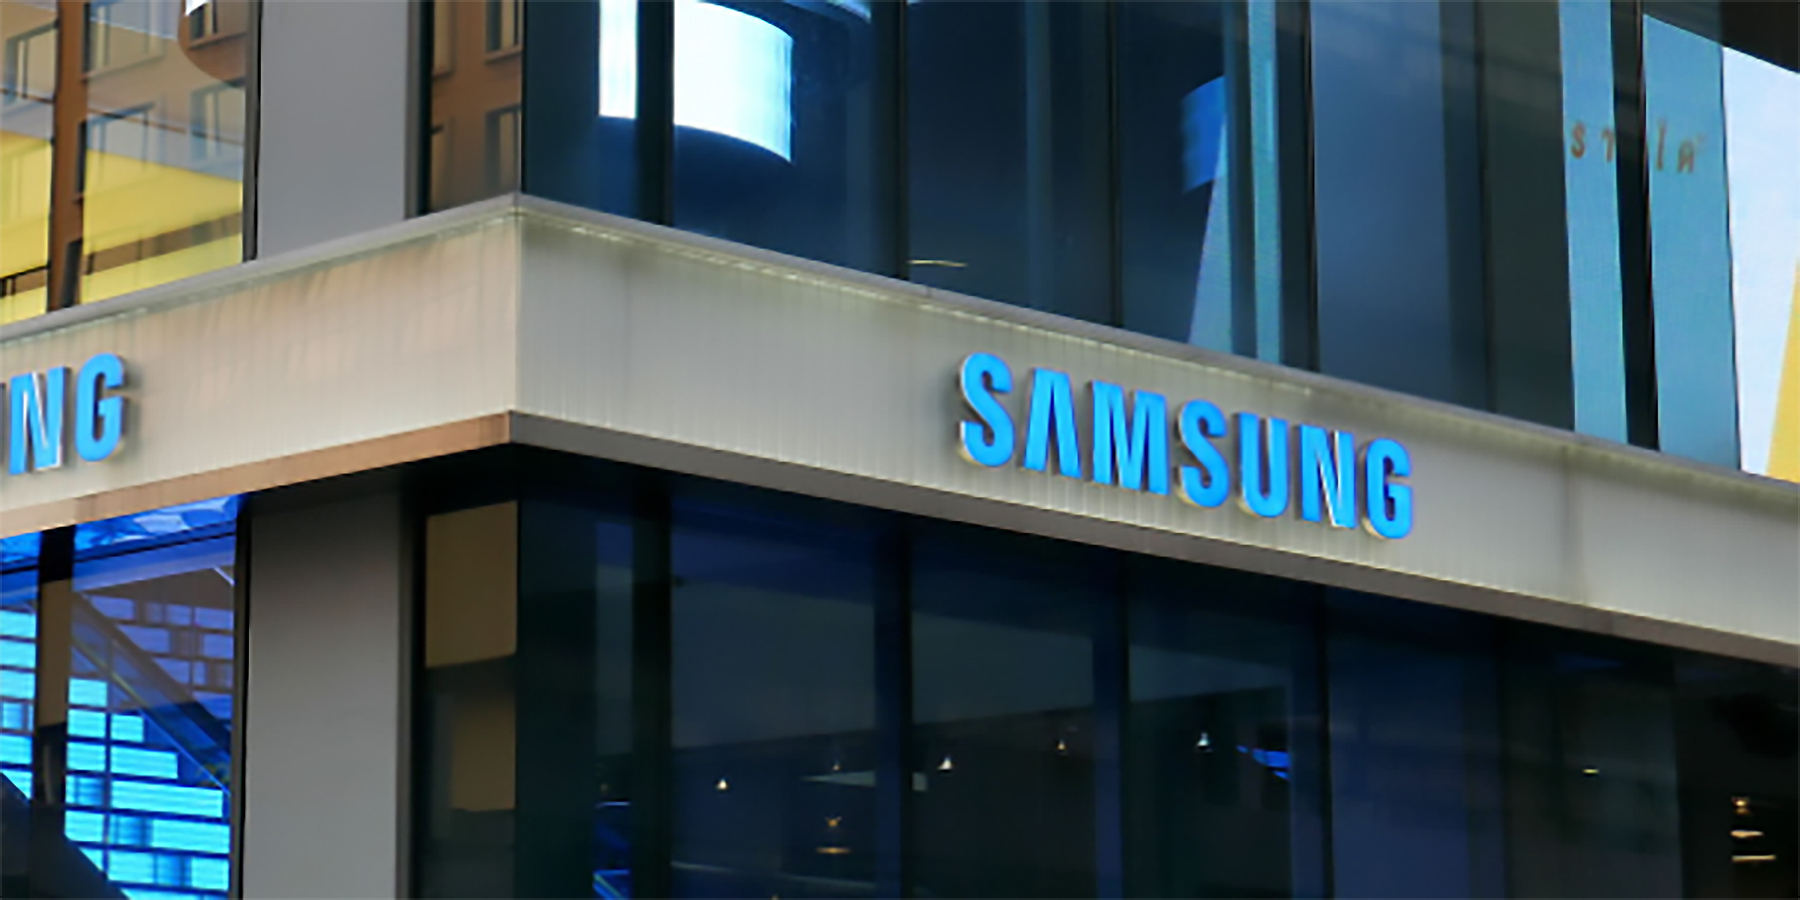 Distribution Strategy of Samsung: Principles and Channels